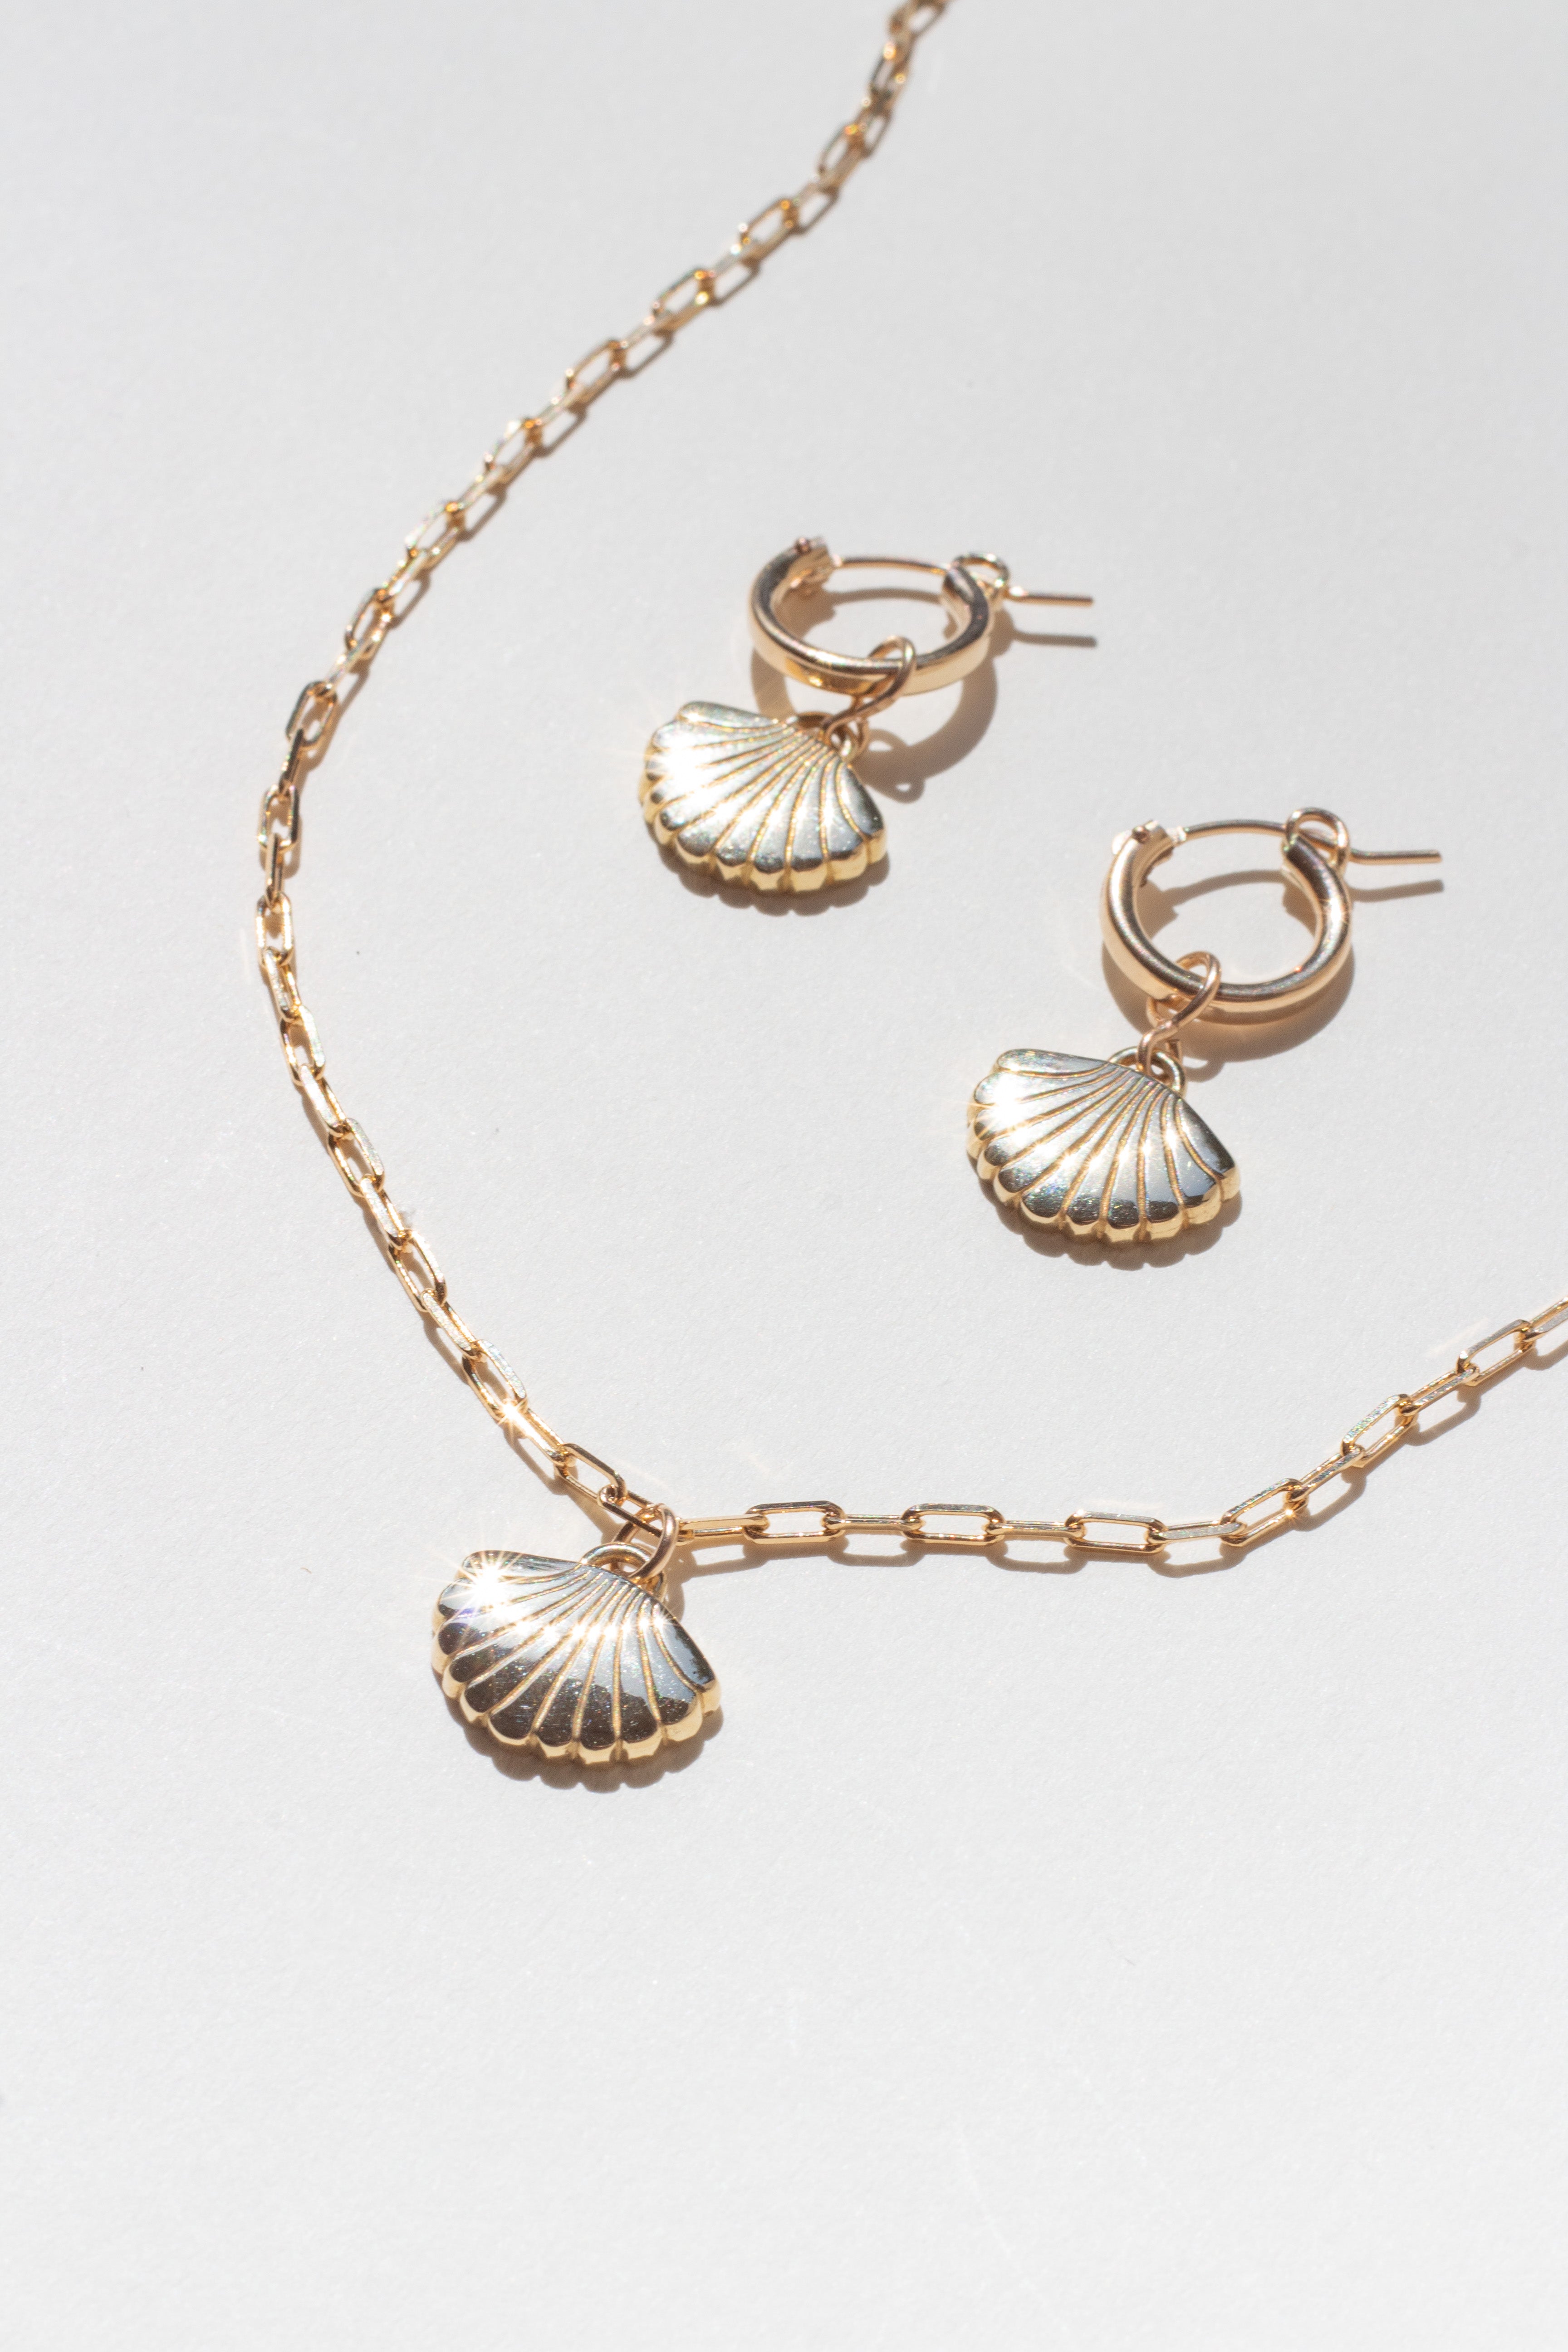 The Coquille Necklace